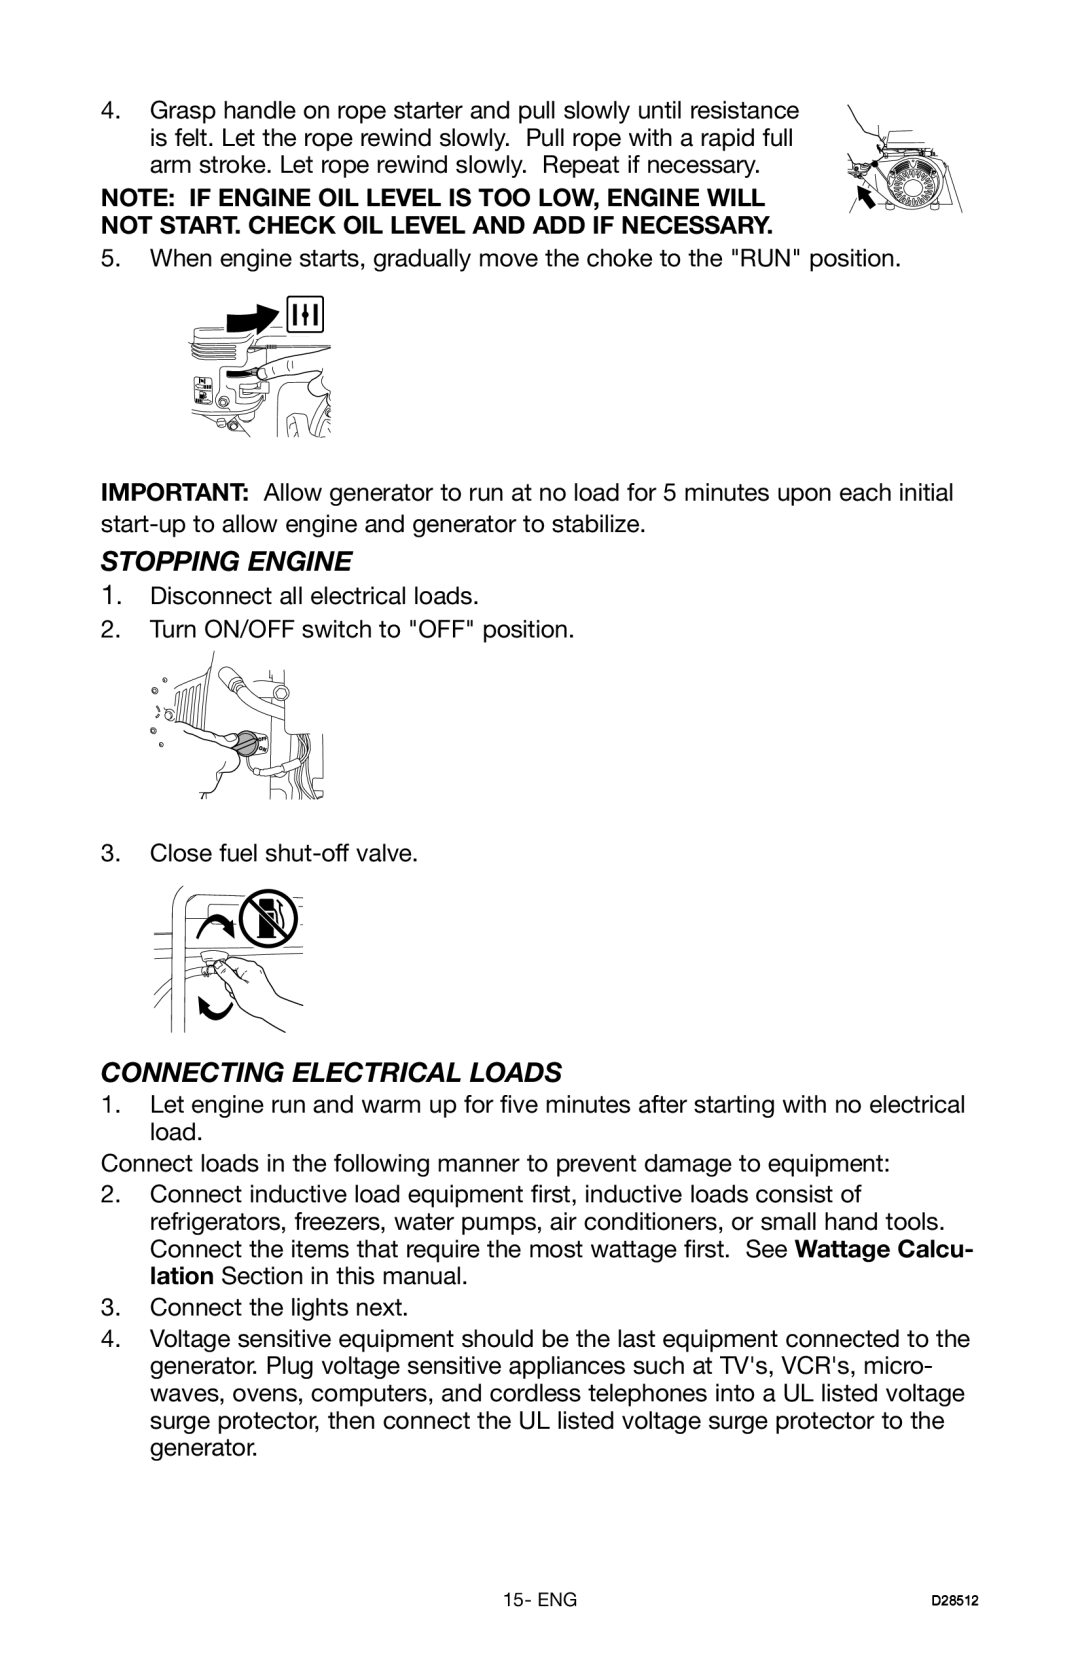 Porter-Cable H450IS instruction manual Stopping Engine, Connecting Electrical Loads 